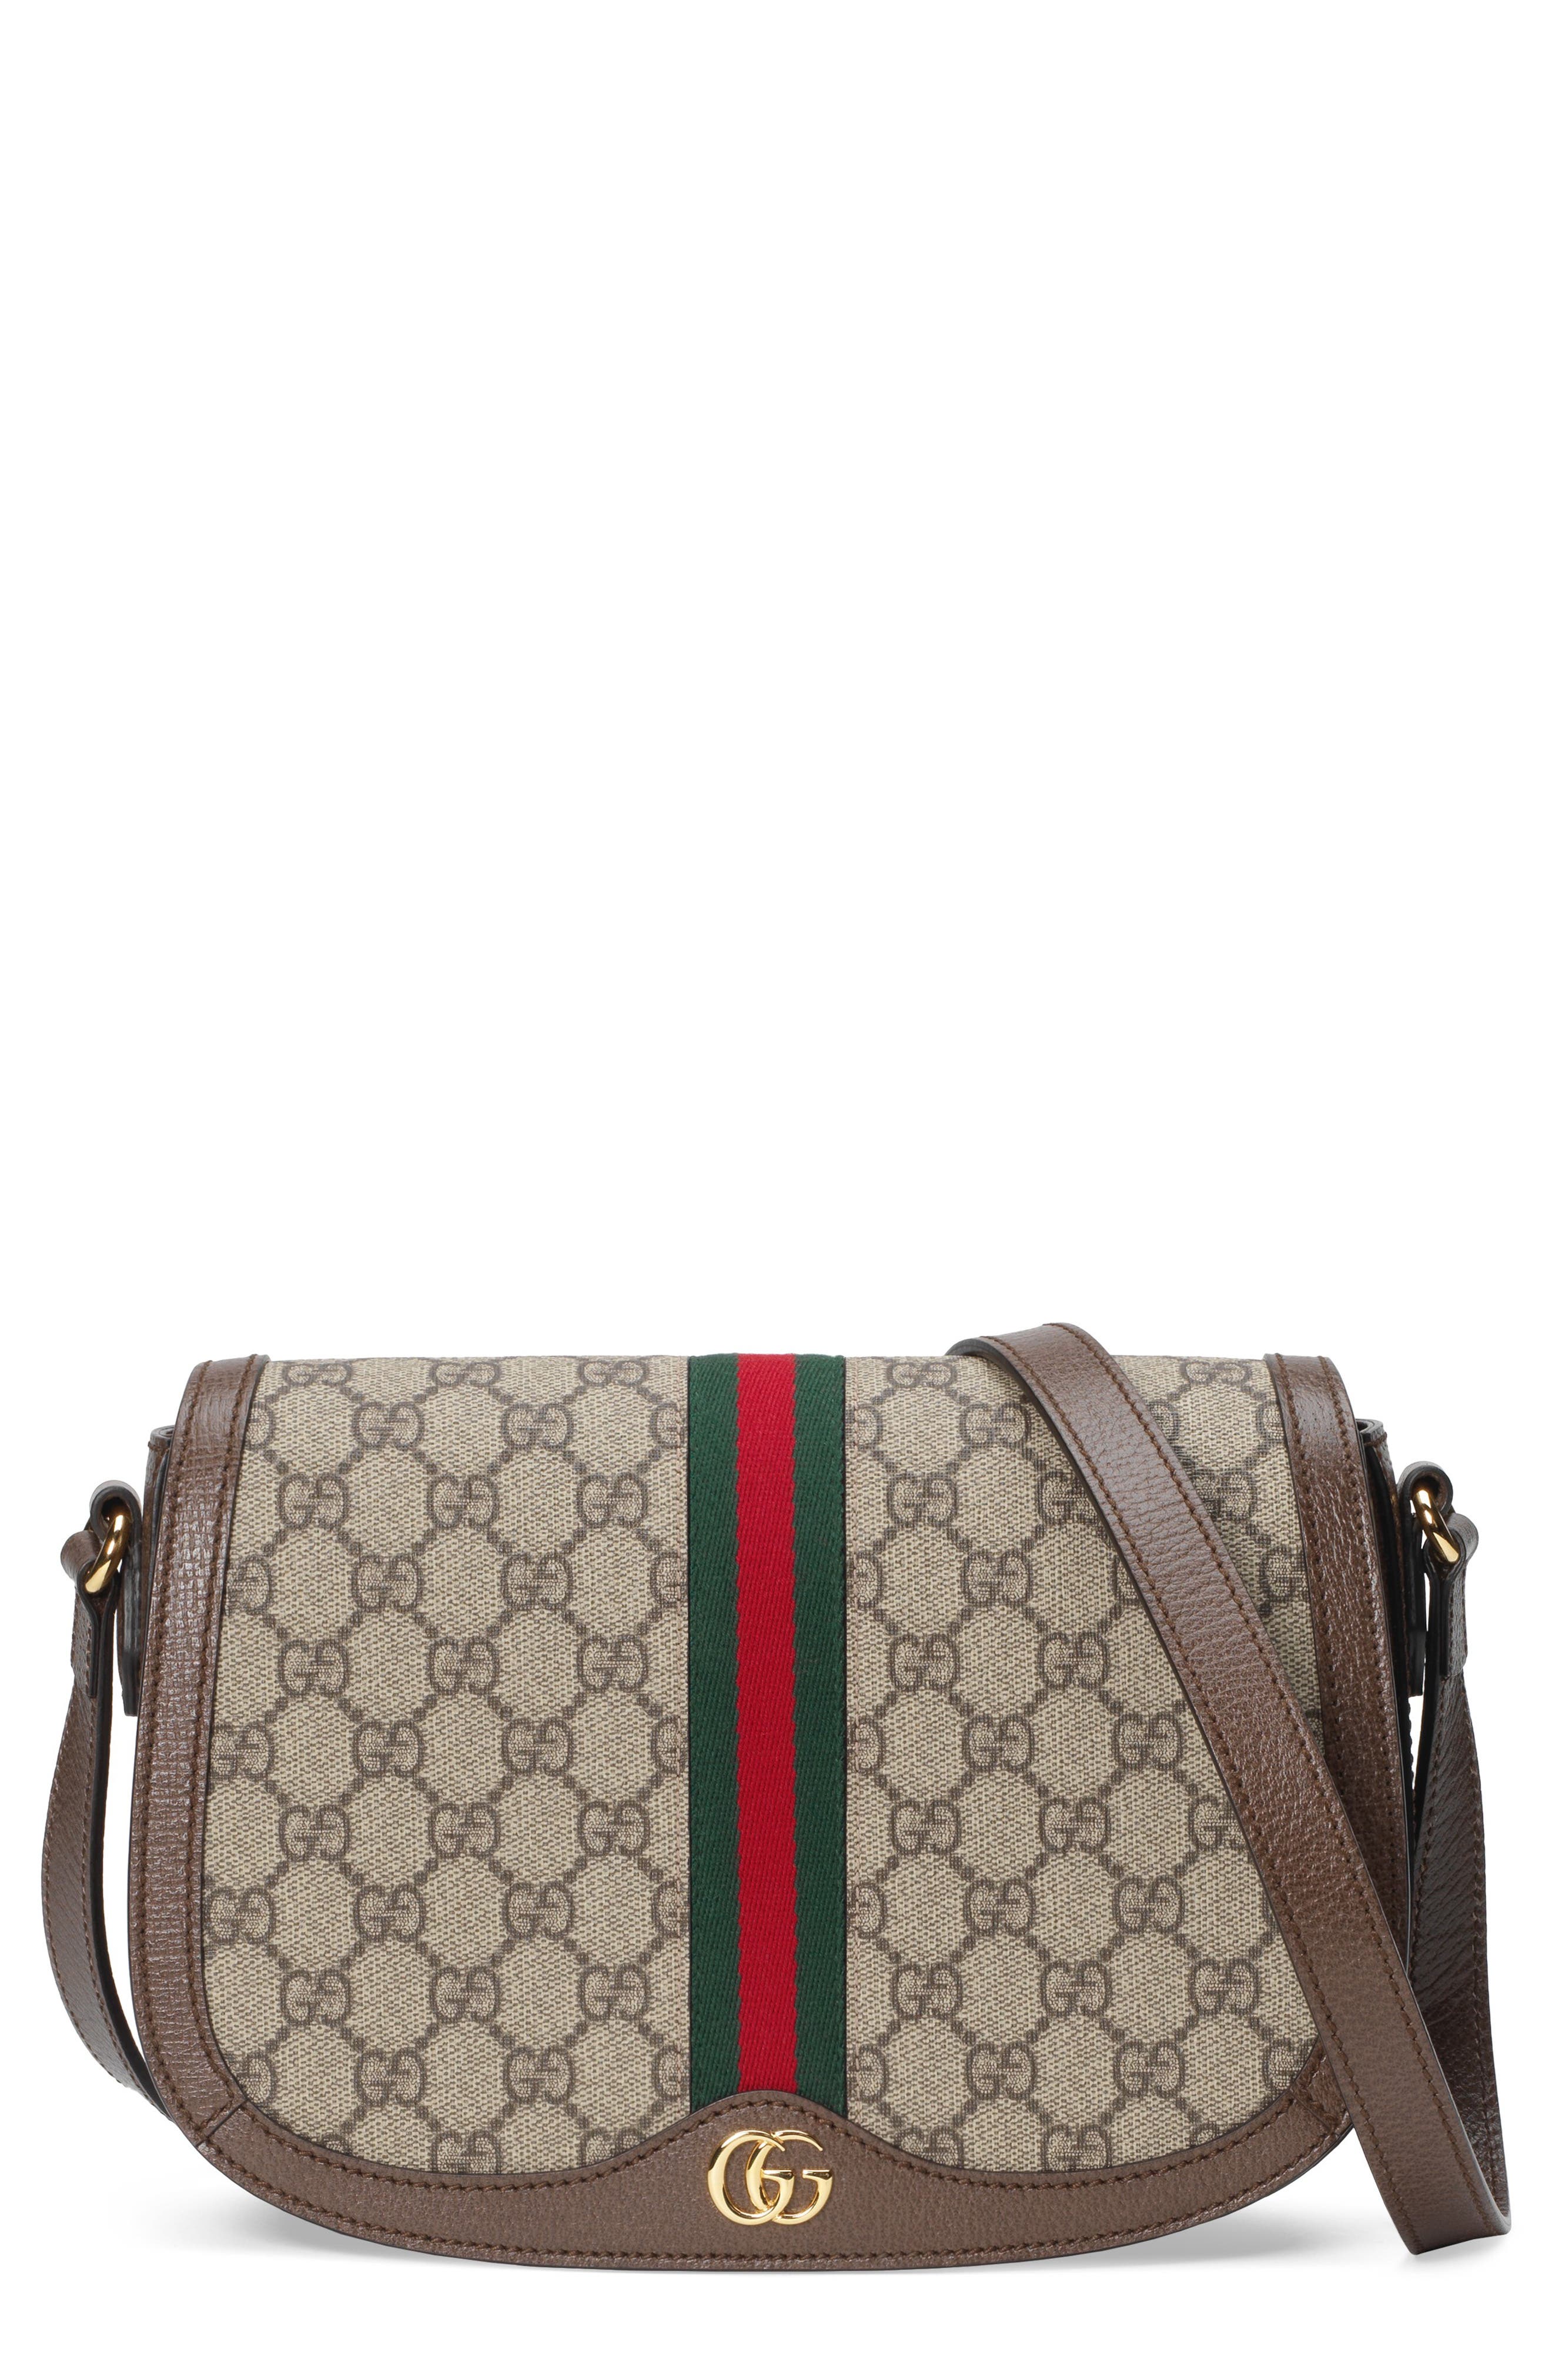 gucci bag with flap